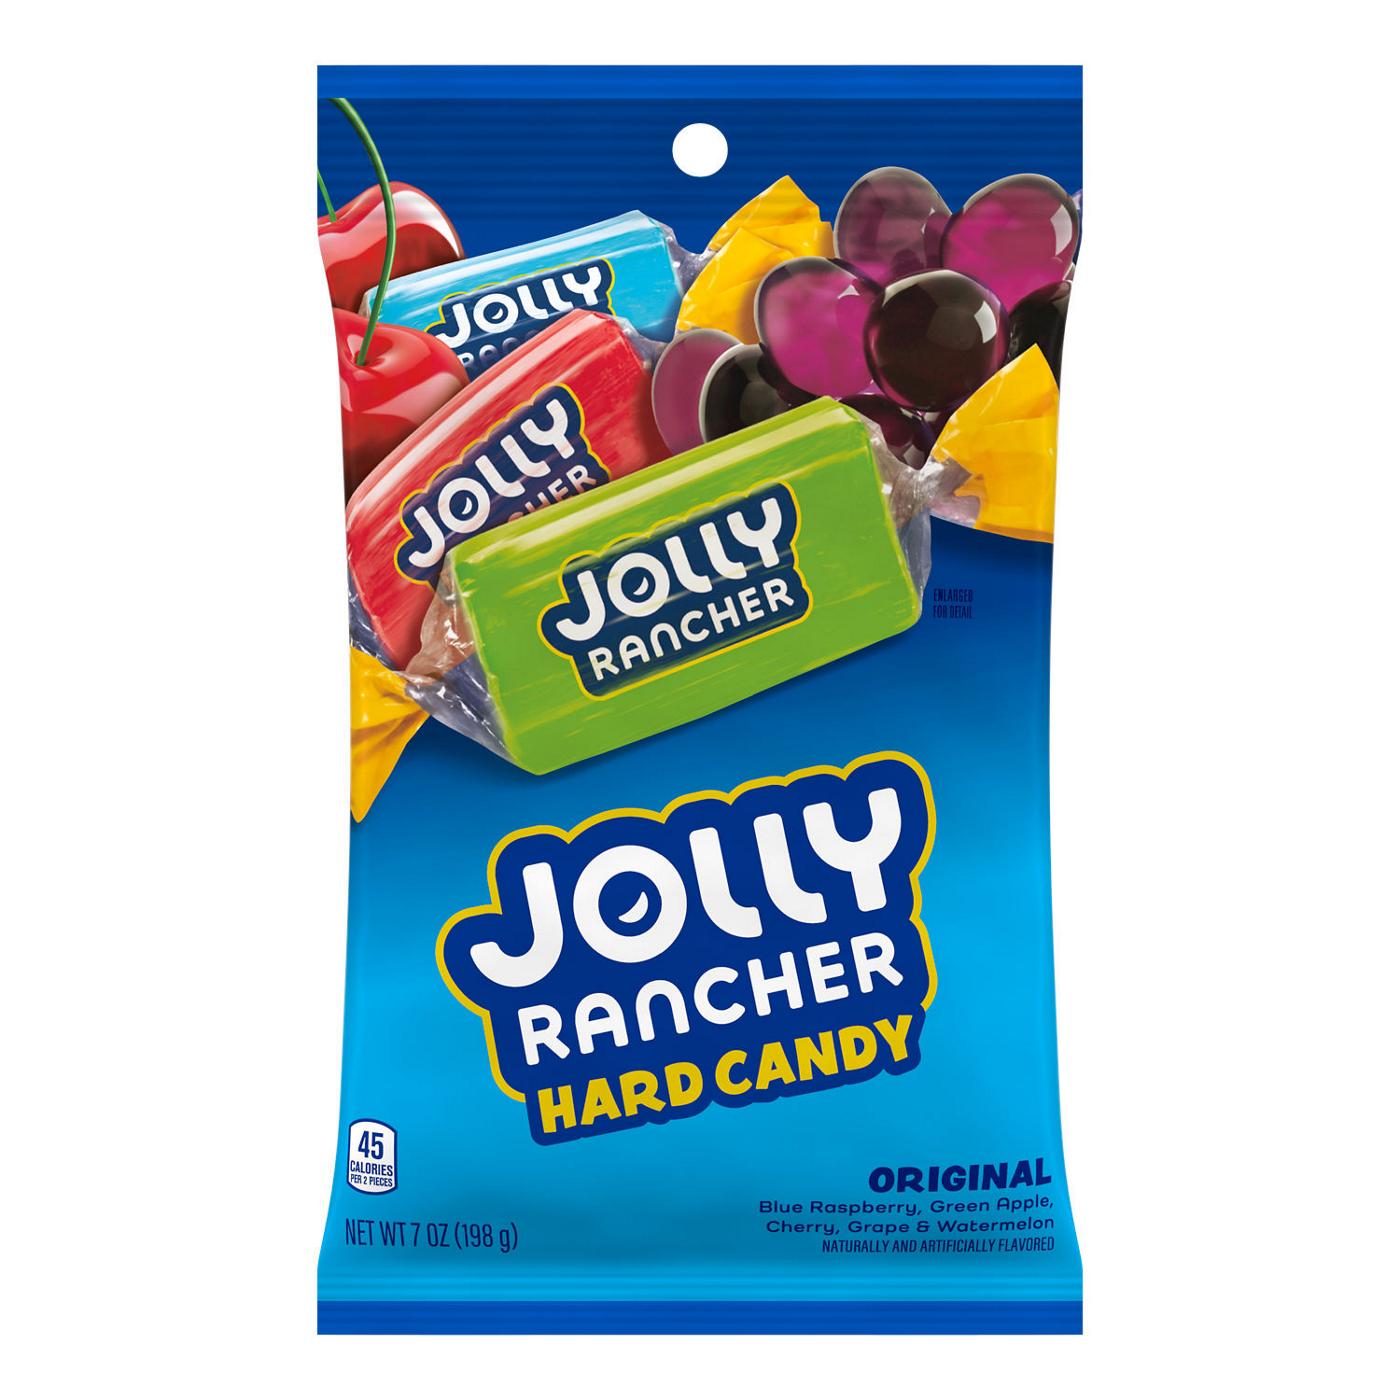 Jolly Rancher Original Hard Candy; image 1 of 2